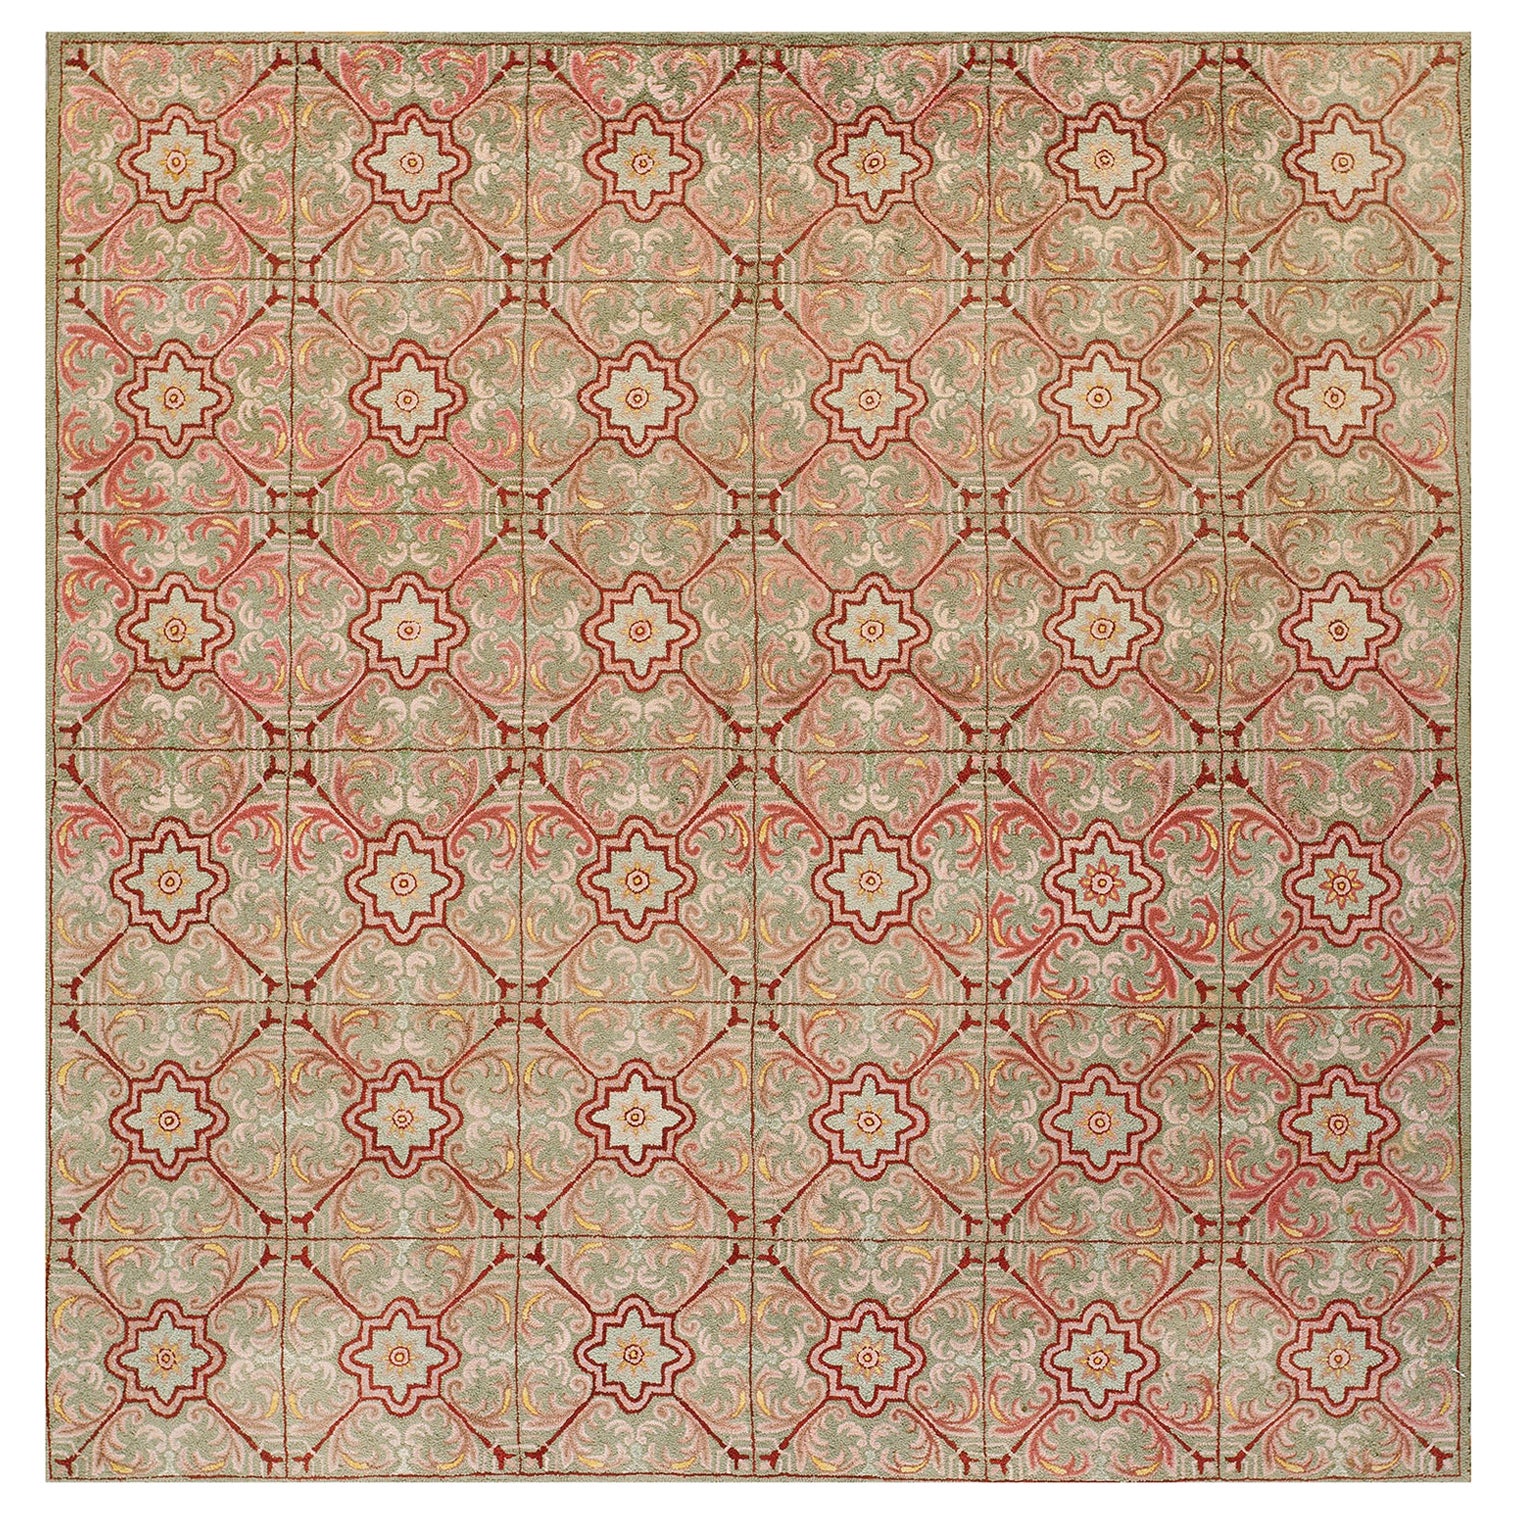 Antique American Hooked Rug  6' 4''x6' 4'' For Sale